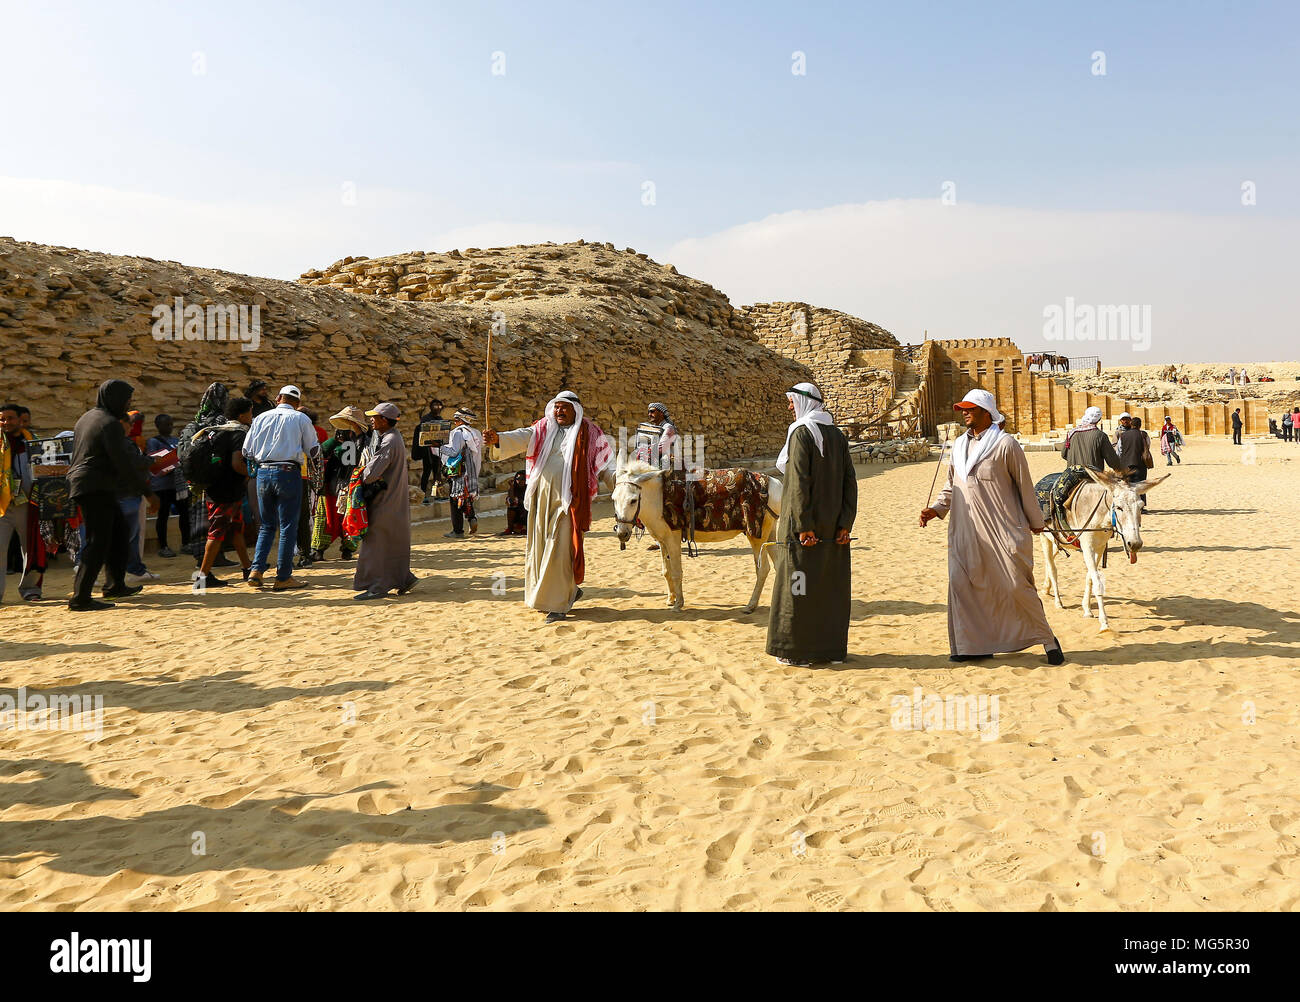 Tourists and souvenir sellers at Saqqara, an ancient burial ground was the necropolis for the Ancient Egyptian capital, Memphis, at Saqqara, Egypt Stock Photo